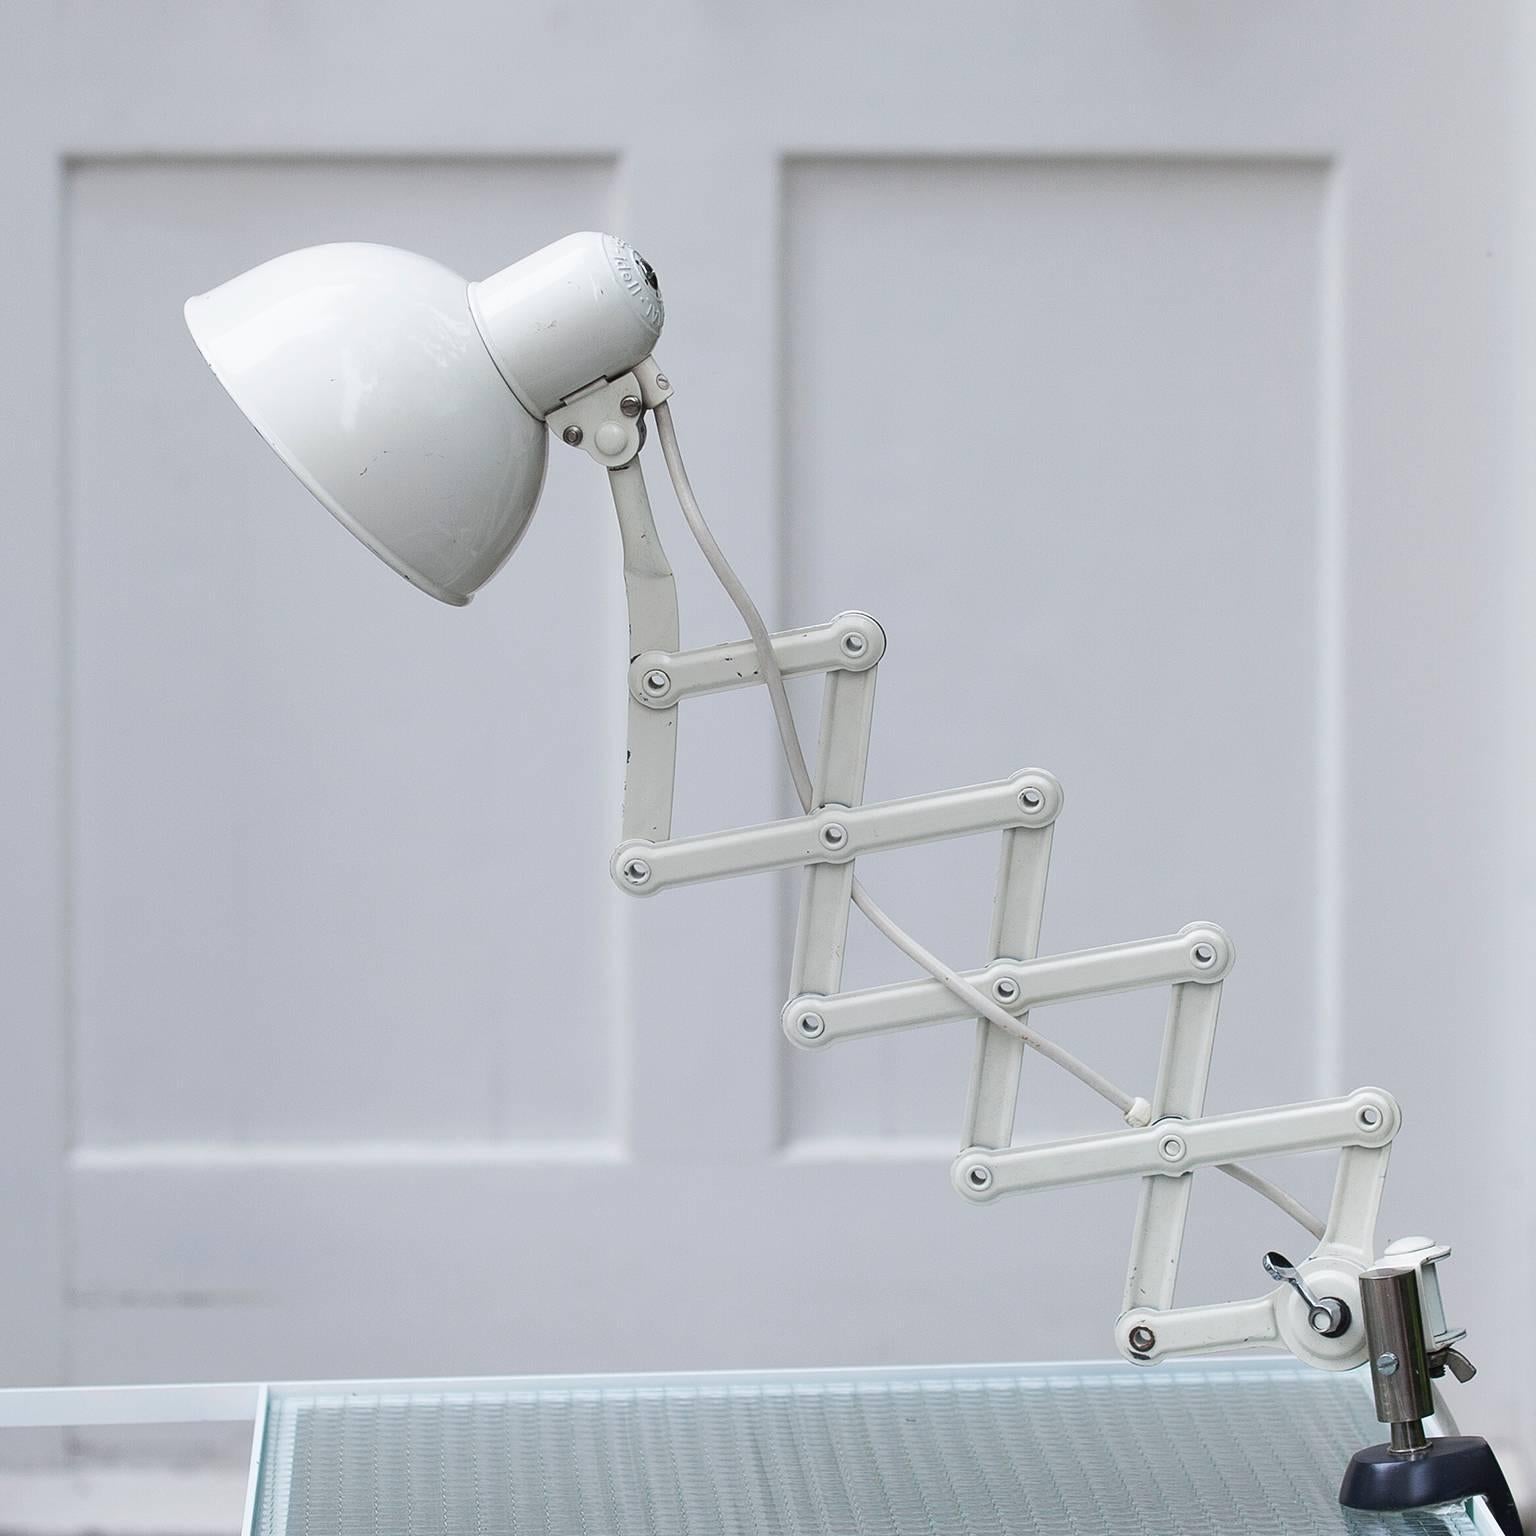 Rare desk mounted Christina Dell Bauhaus table lamp for Kaiser Idell, swing arm lamp of white painted metal with Gate-Fold Mechanism. Signed on shade and the base. Largest width around 80cm. Ten are available.